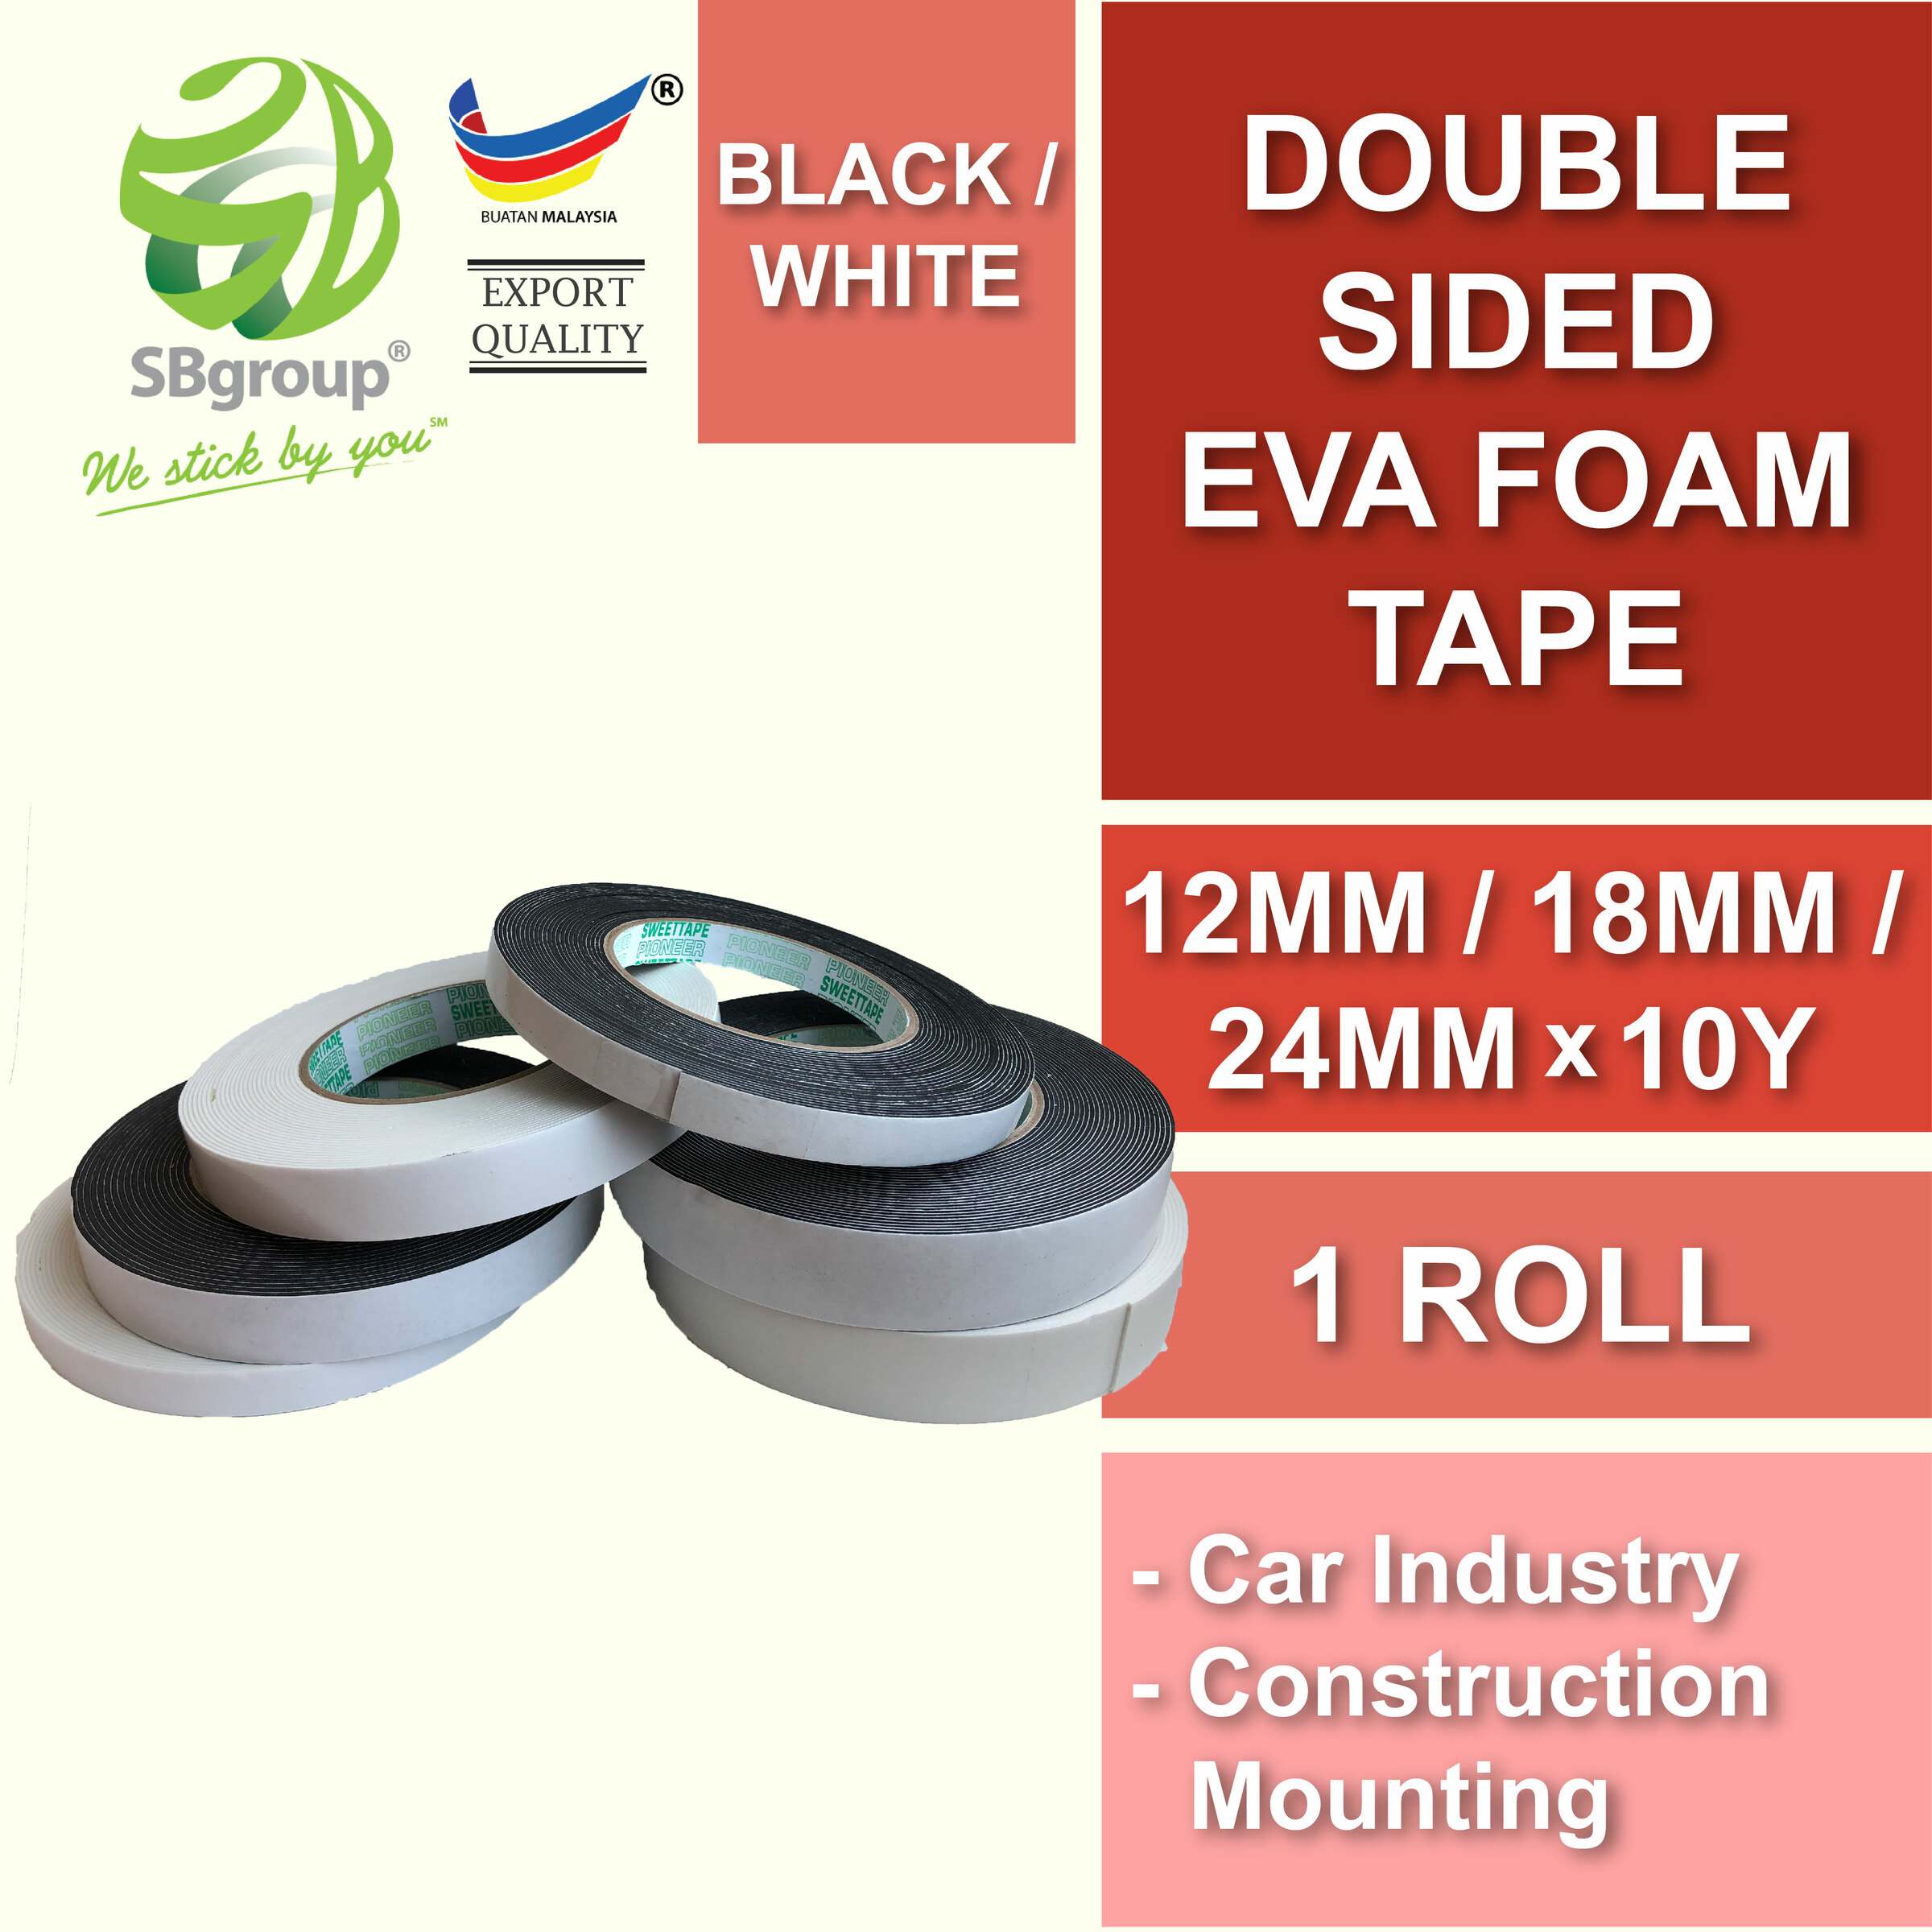 10 Yards Double Sided Eva Foam Tape Sb Tape Group Sdn Bhd A